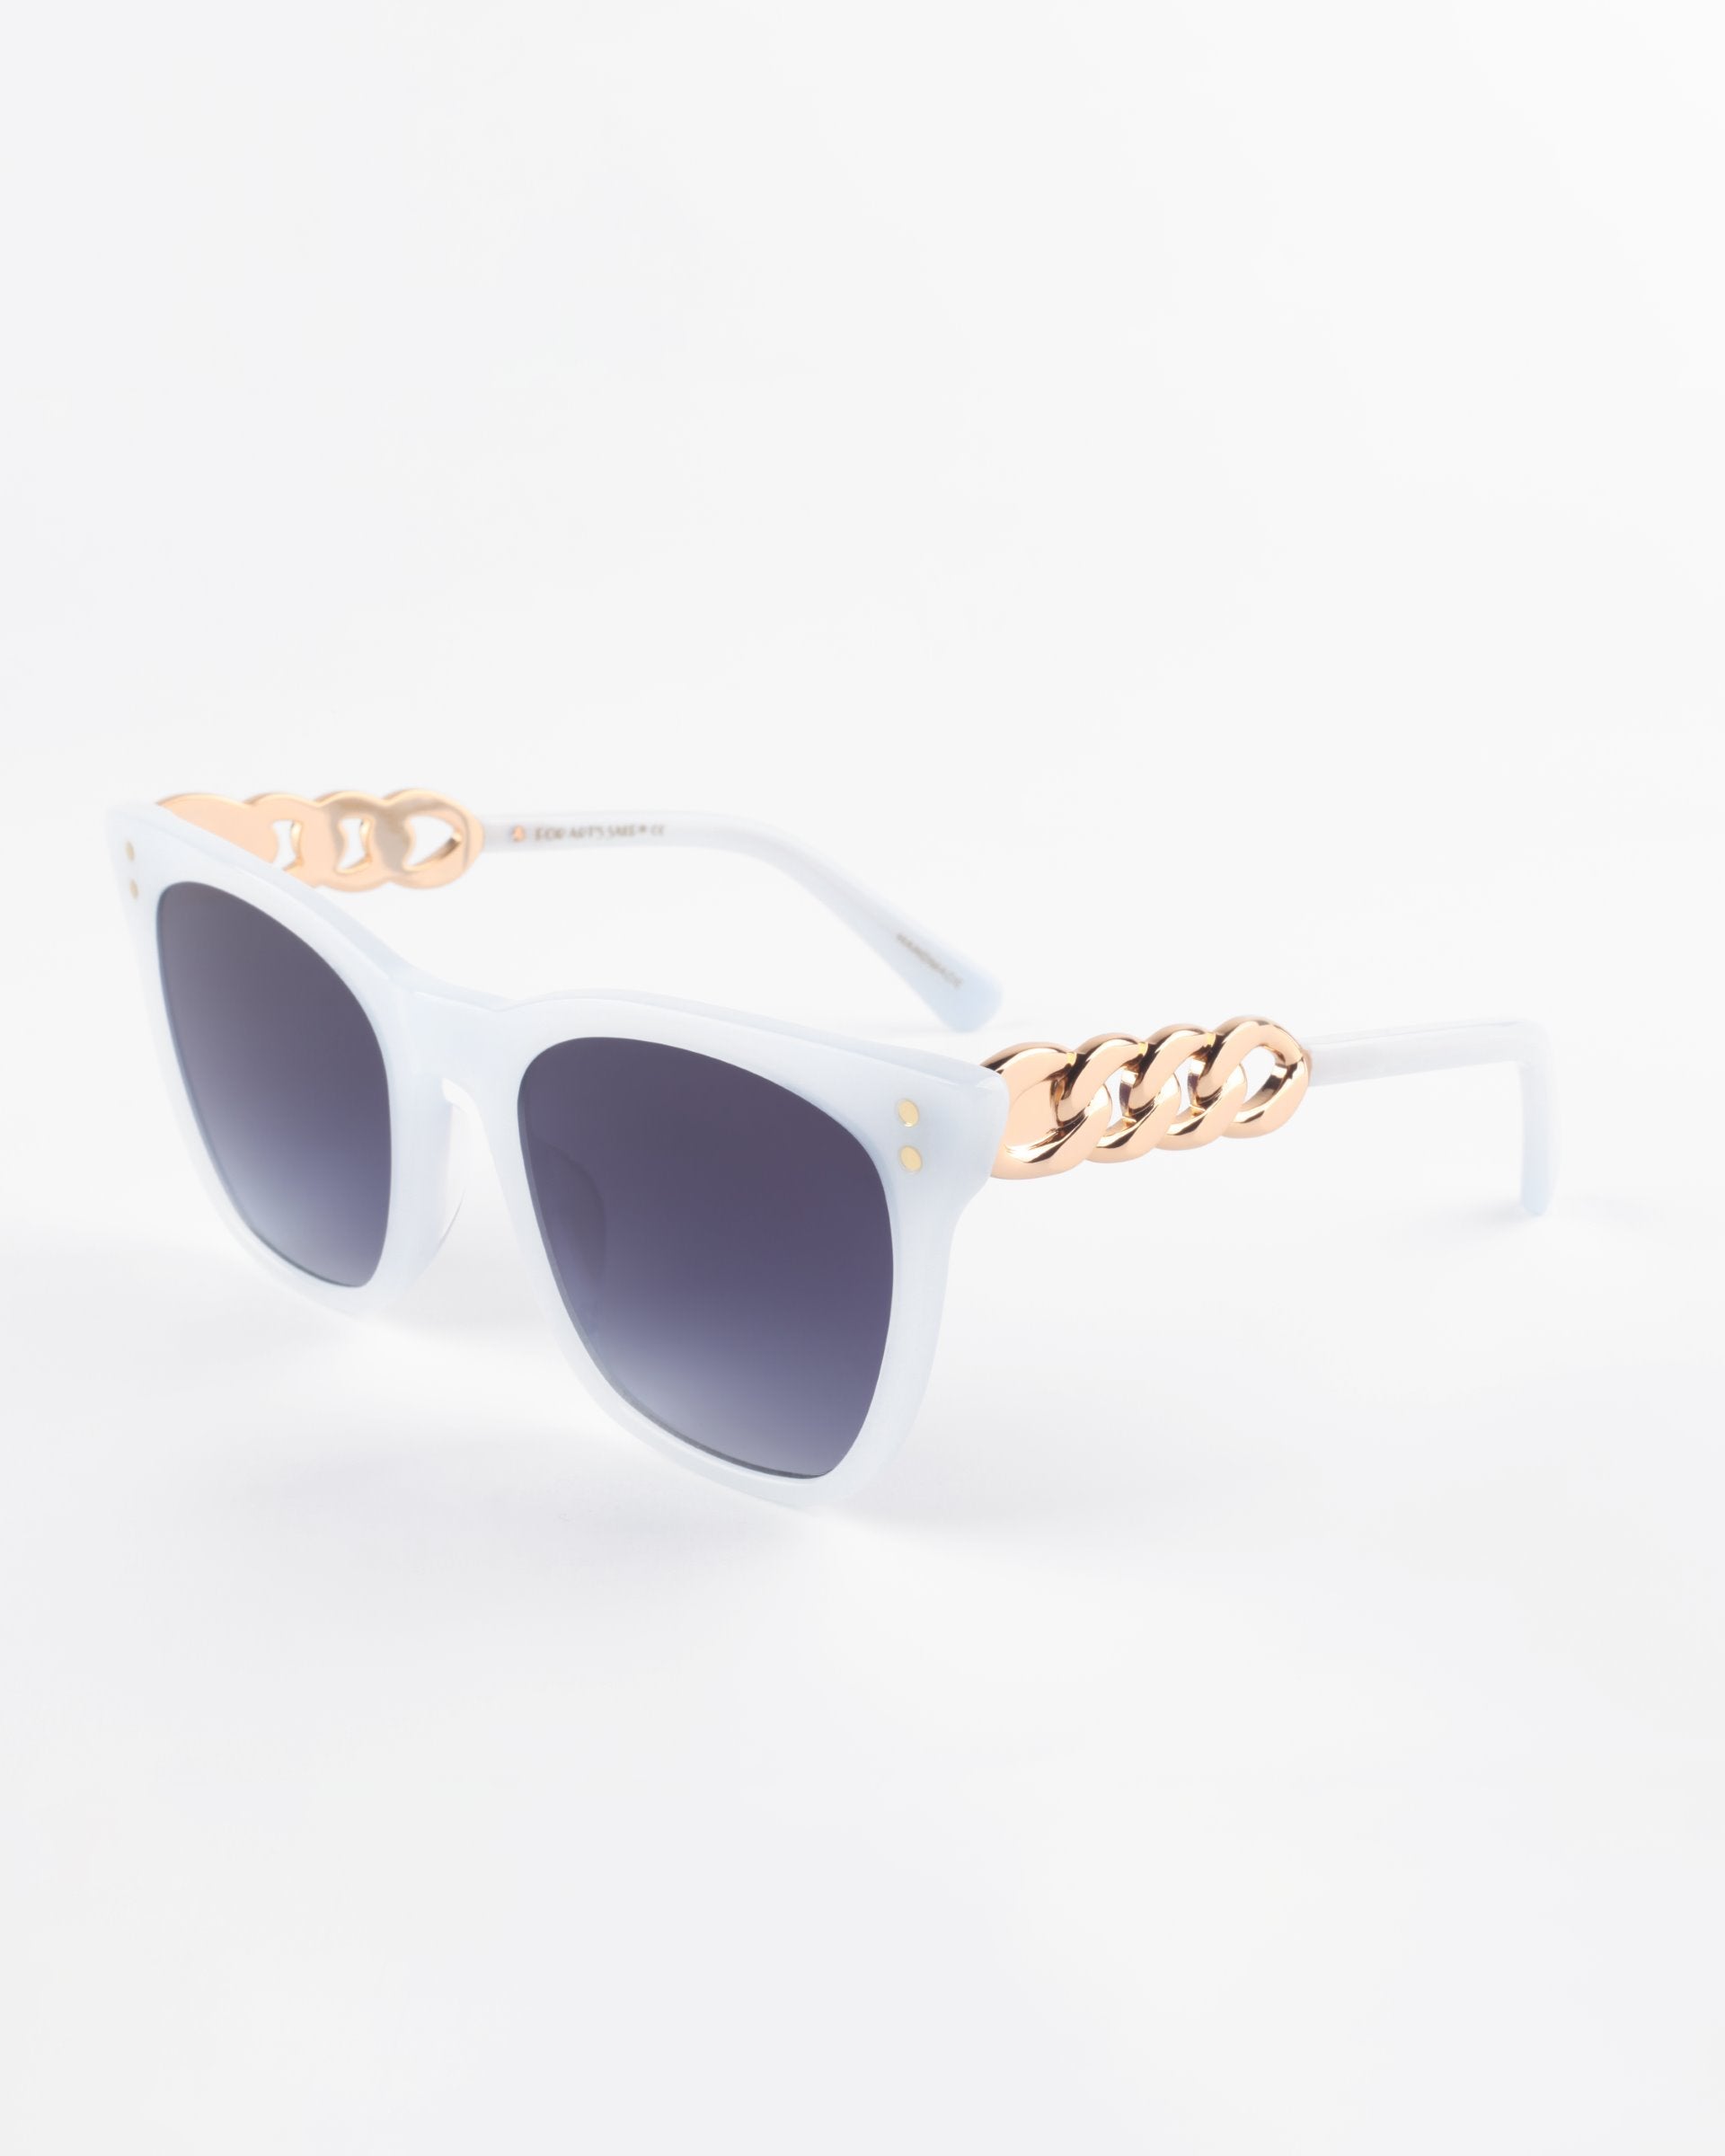 A pair of white cat-eye sunglasses with dark lenses and gold chain-link accents on the temples. The acetate frame has a glossy finish, and the Deco sunglasses by For Art&#39;s Sake® are set against a plain white background.